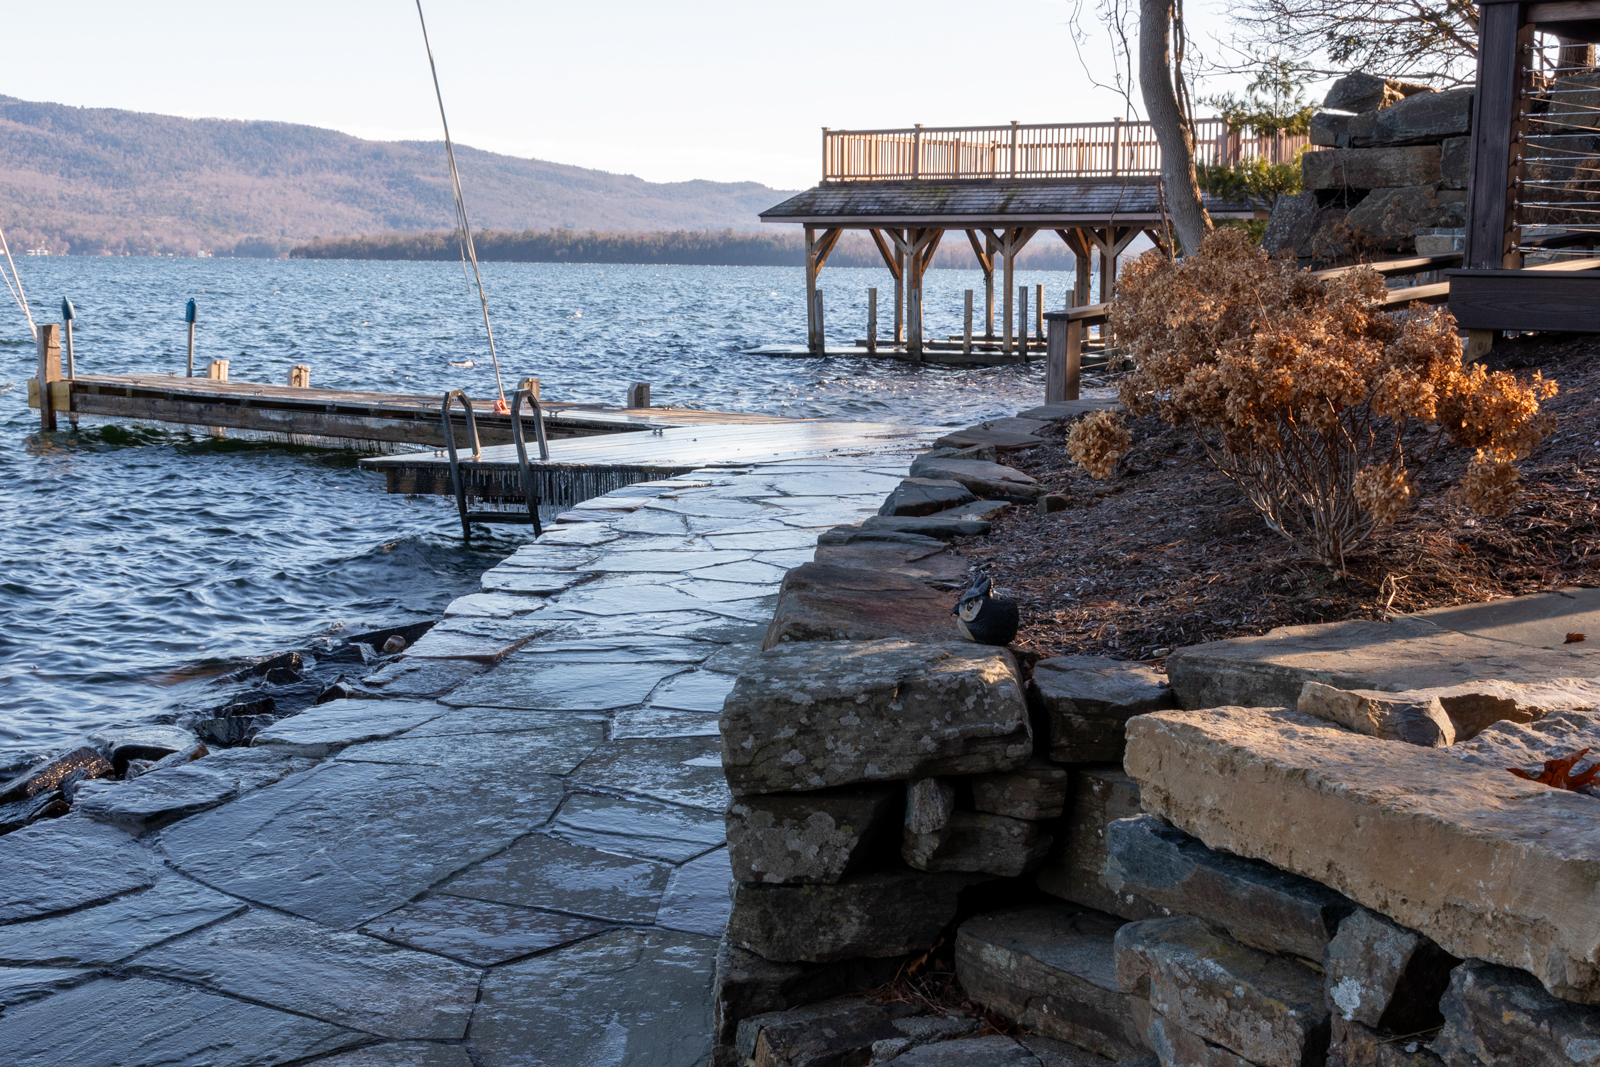 Views of beautiful Lake George from the carefully placed stone shoreline landing at the Rock View Residence designed by AJA Architecture and Planning. 